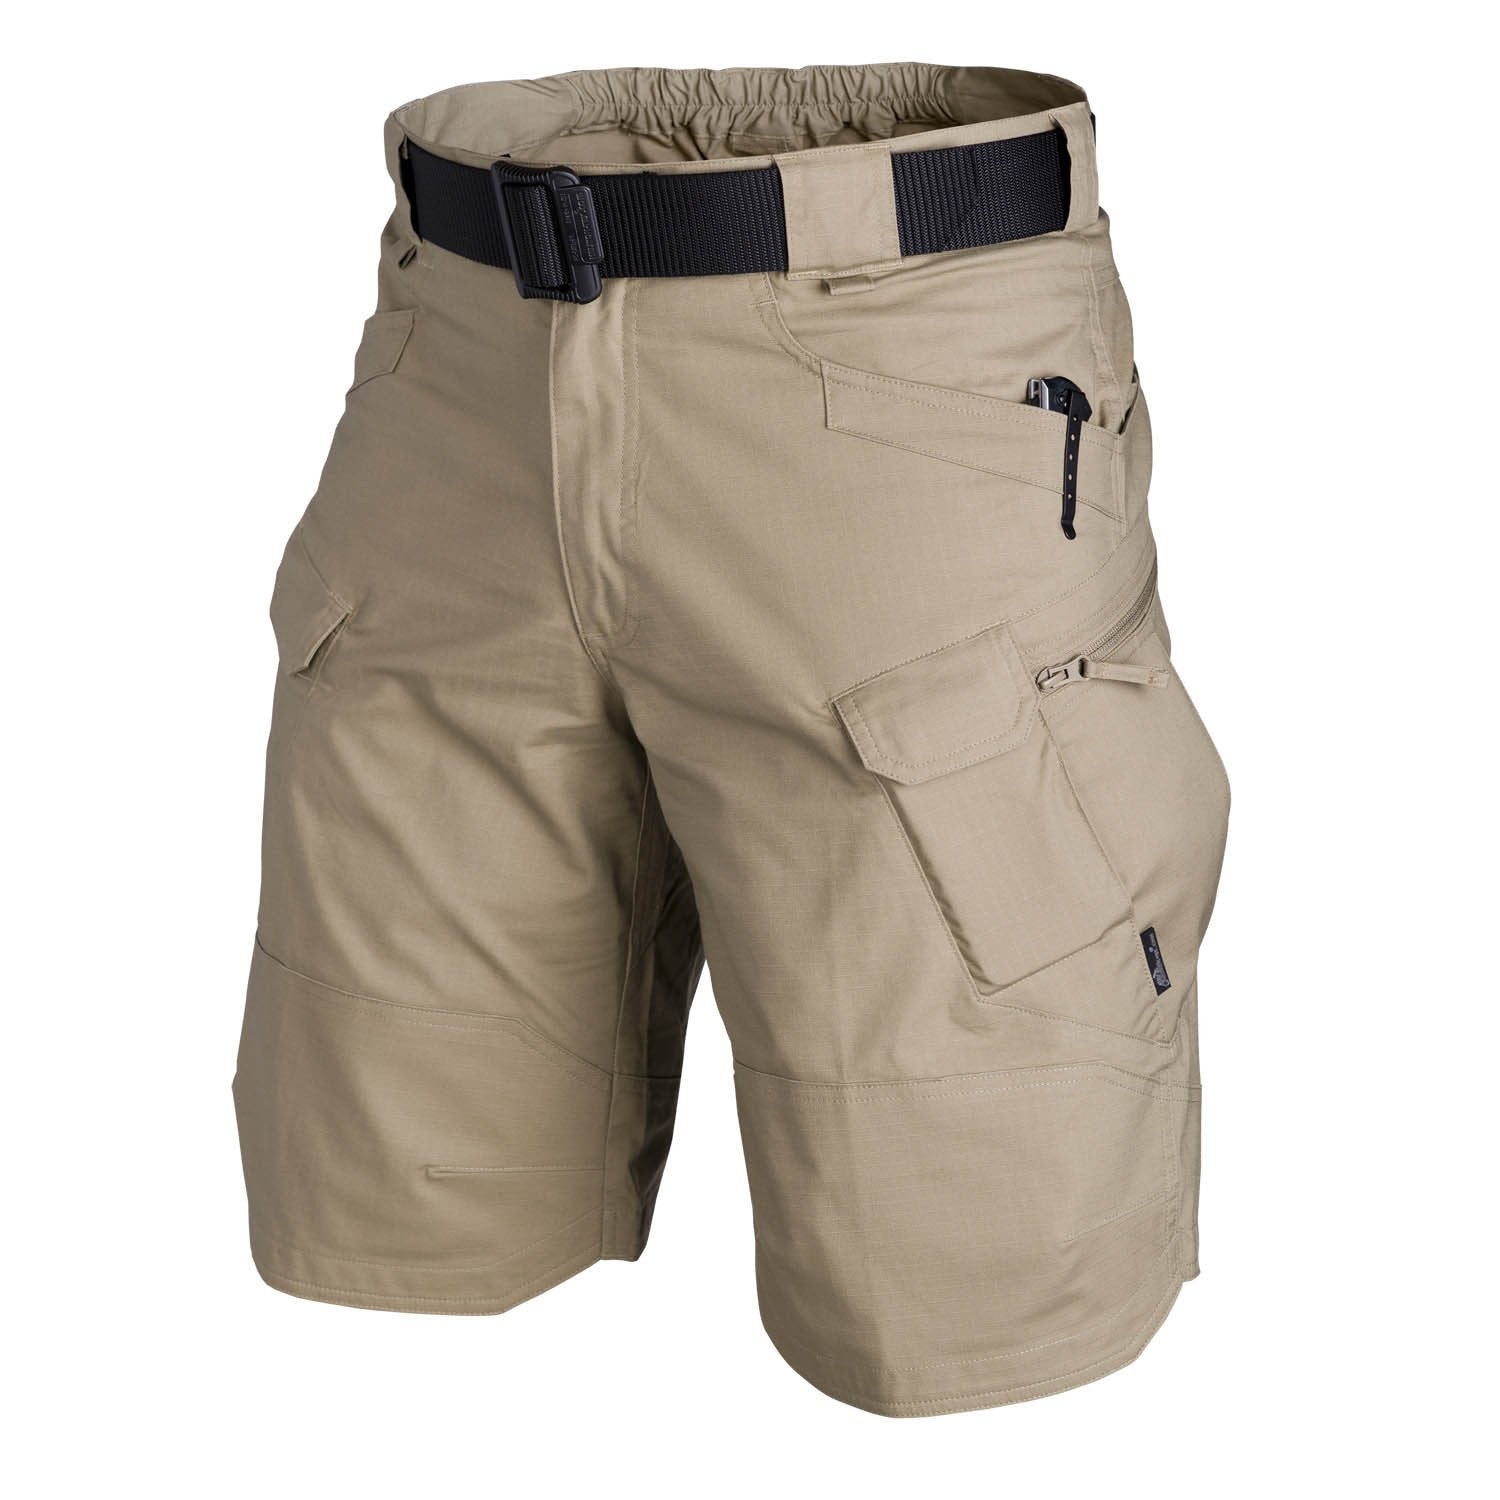 On Sale-Last day promotion- IX9 Tactical  Shorts